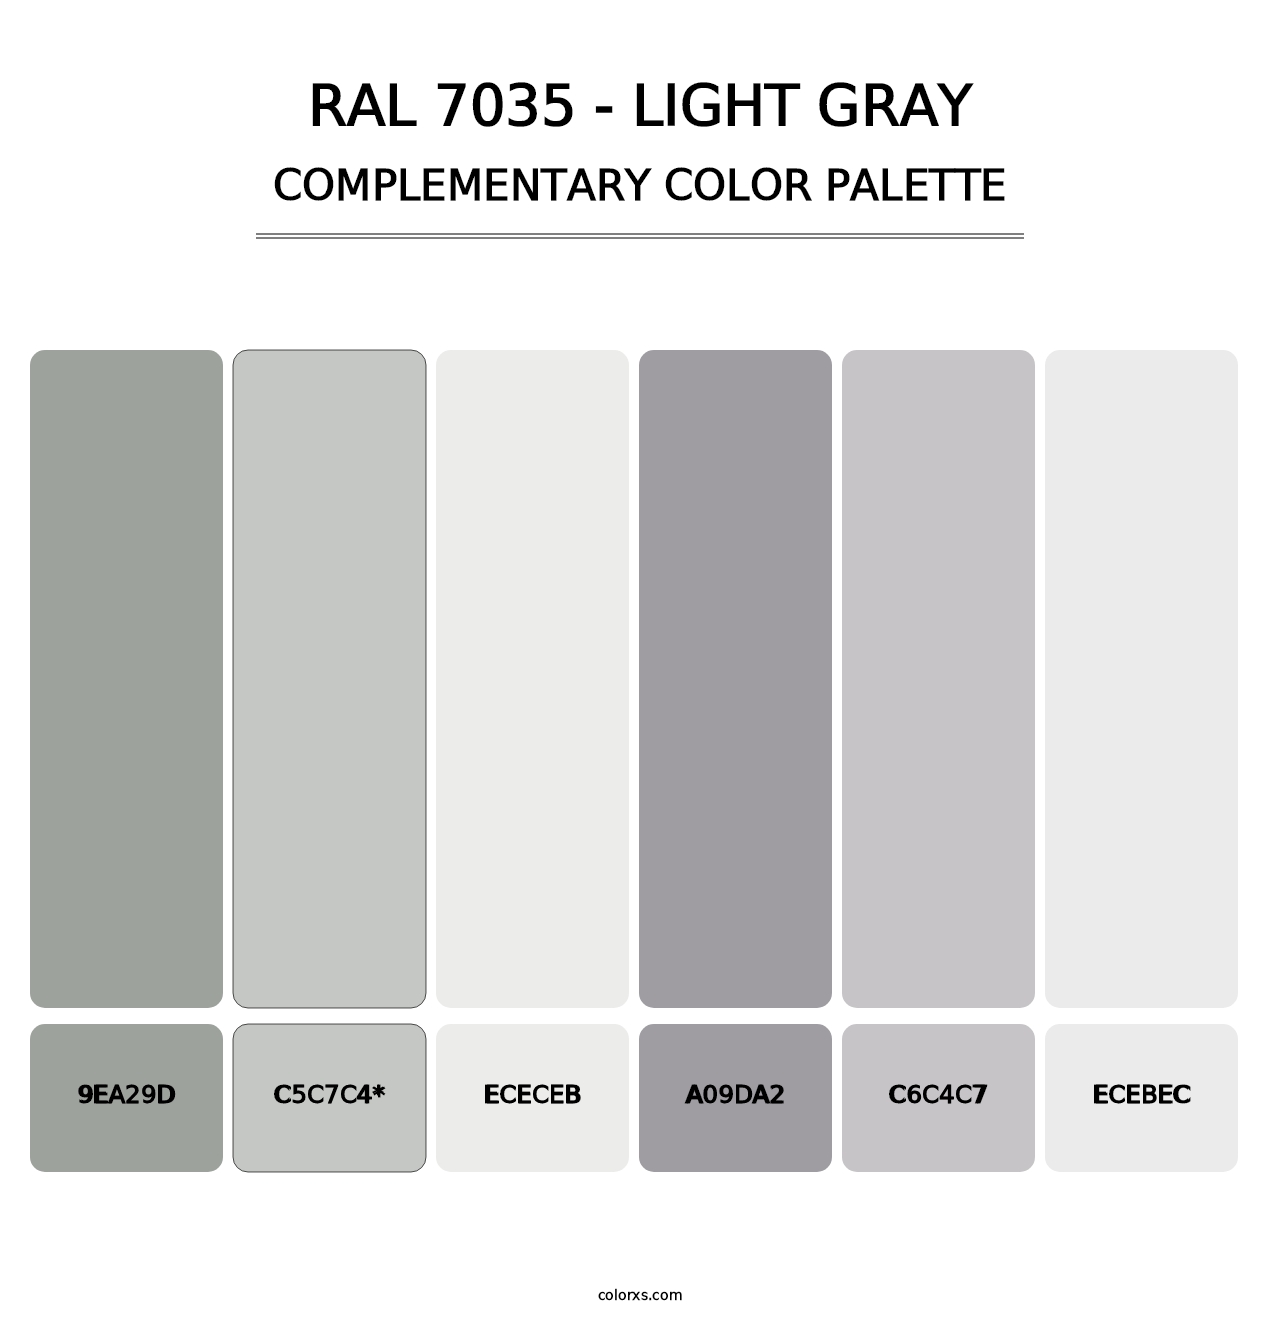 RAL 7035 - Light Gray - Complementary Color Palette